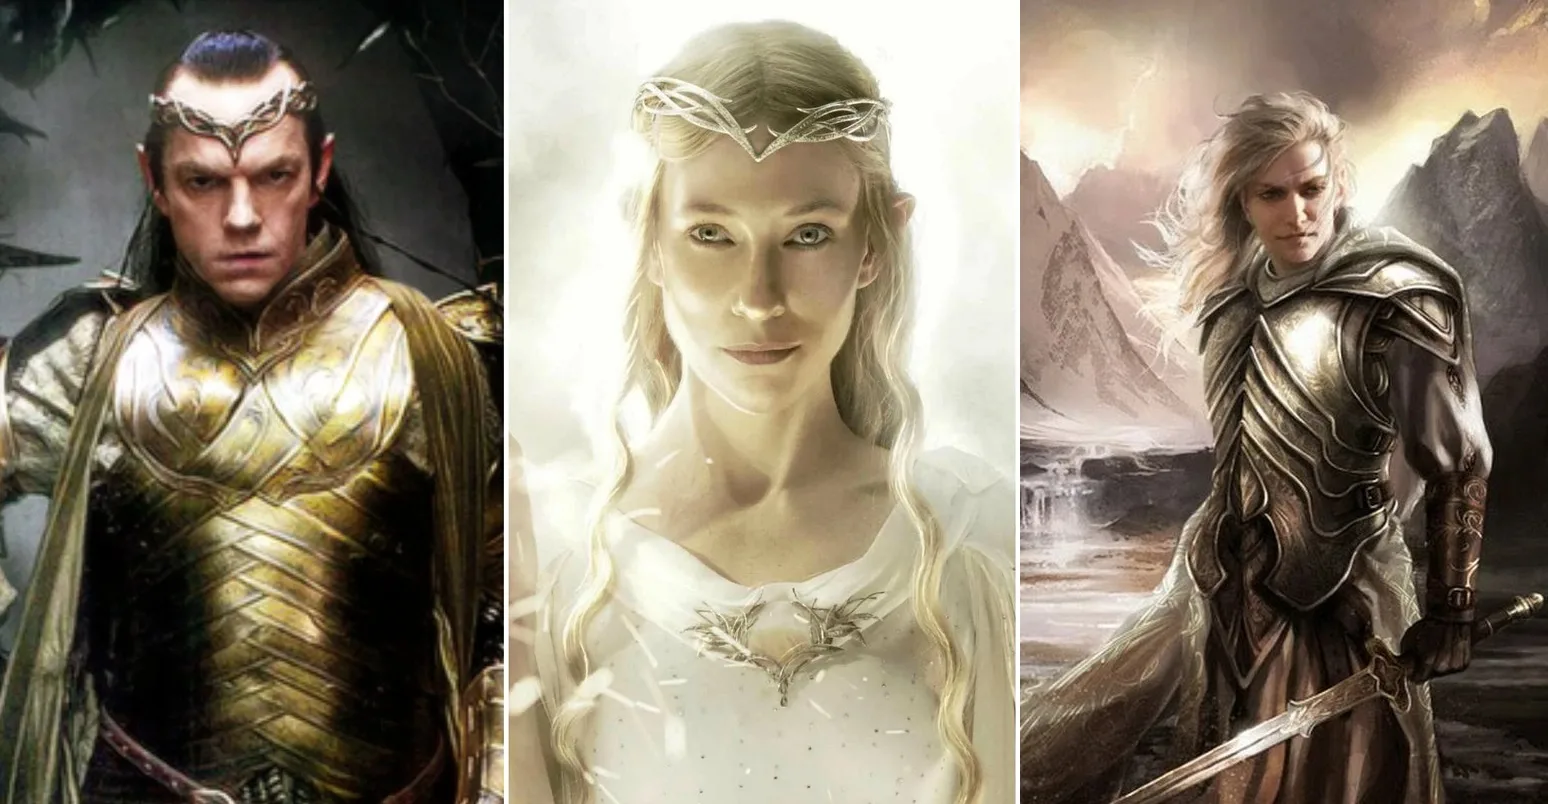 Most powerful elves in Middle Earth and the Lord of the Rings